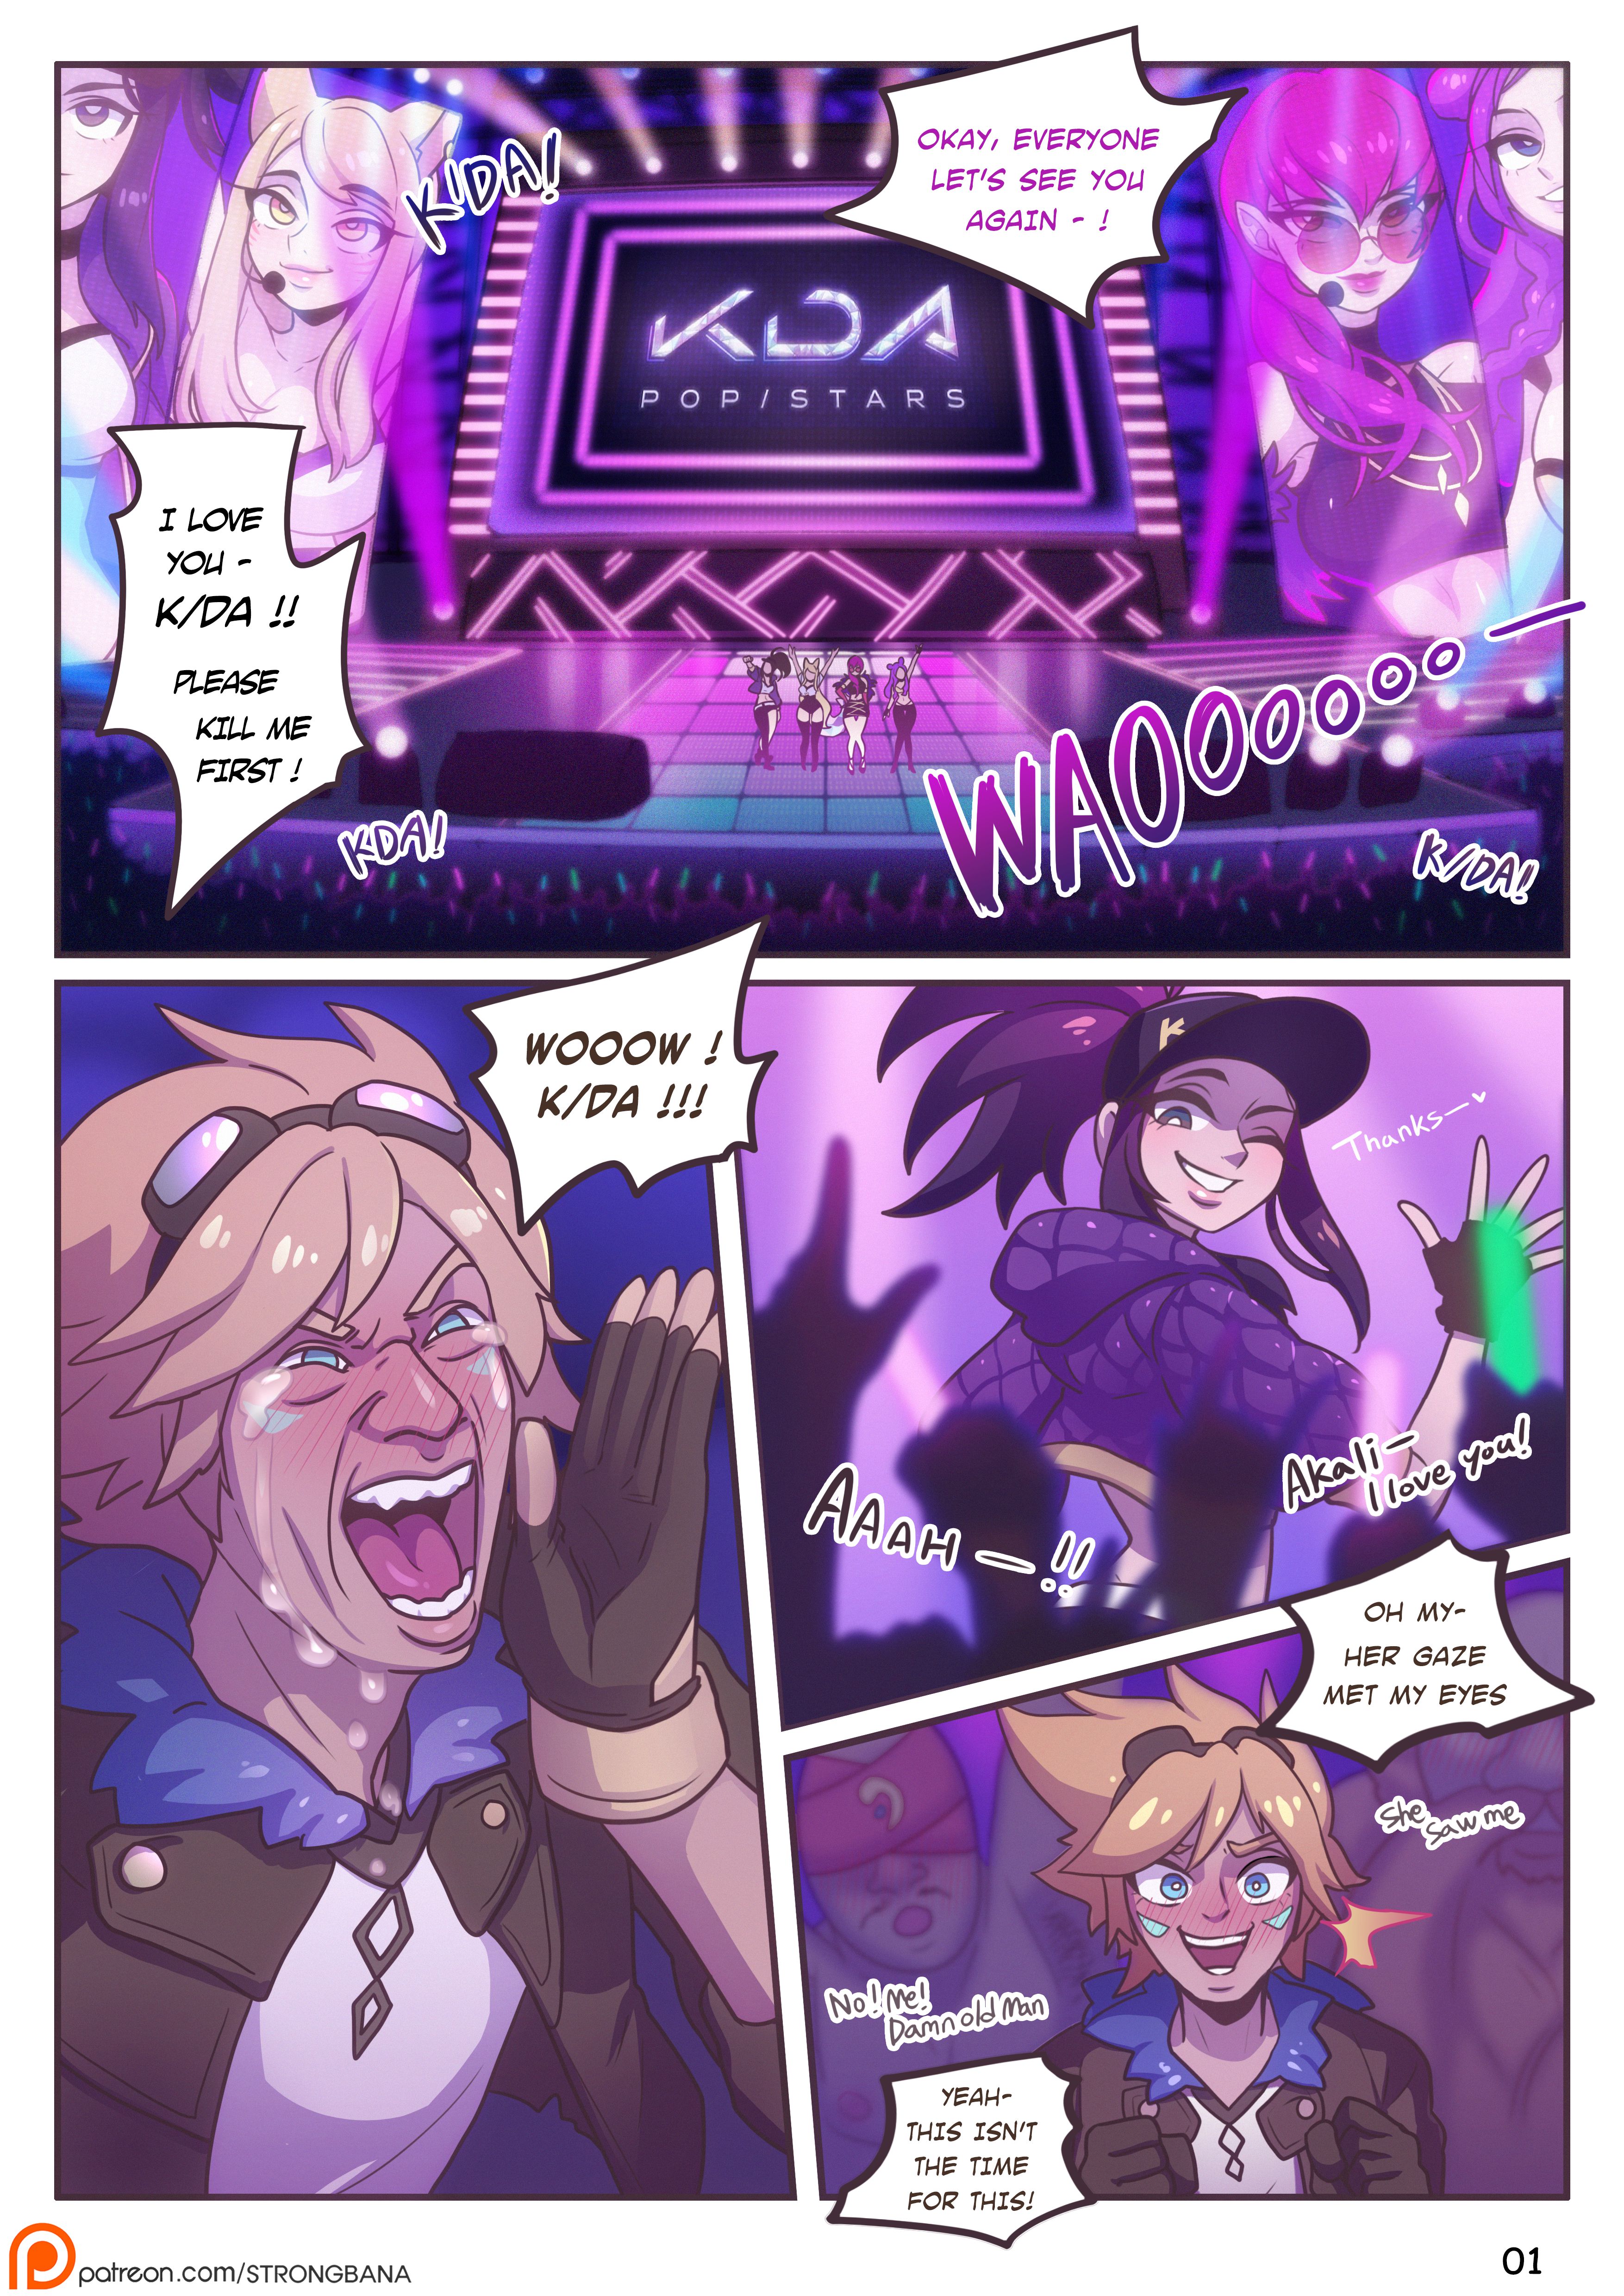 After Party (League of Legends) [Strong Bana] - 1 . After Party - Chapter 1  (League of Legends) [Strong Bana] - AllPornComic